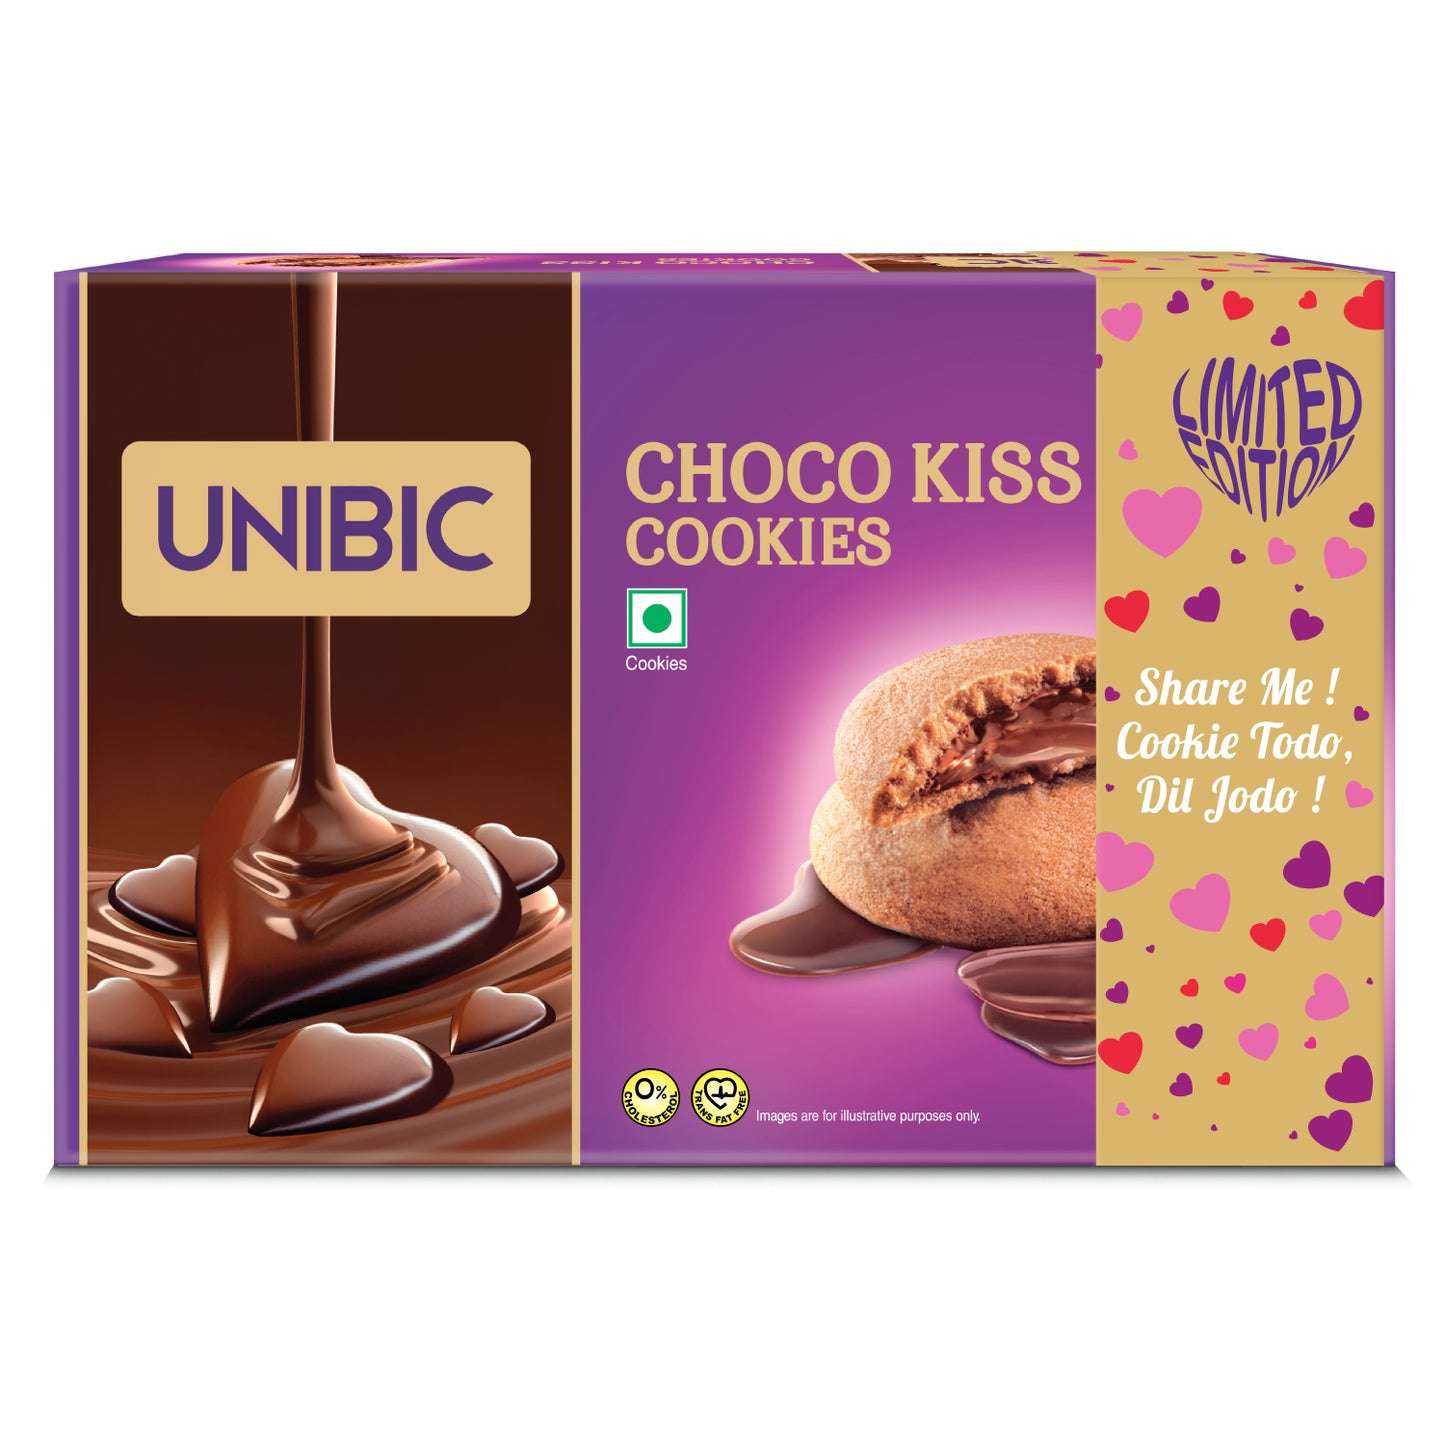 Choco Kiss Cookies Valentine Day Limited Edition, 500 g.